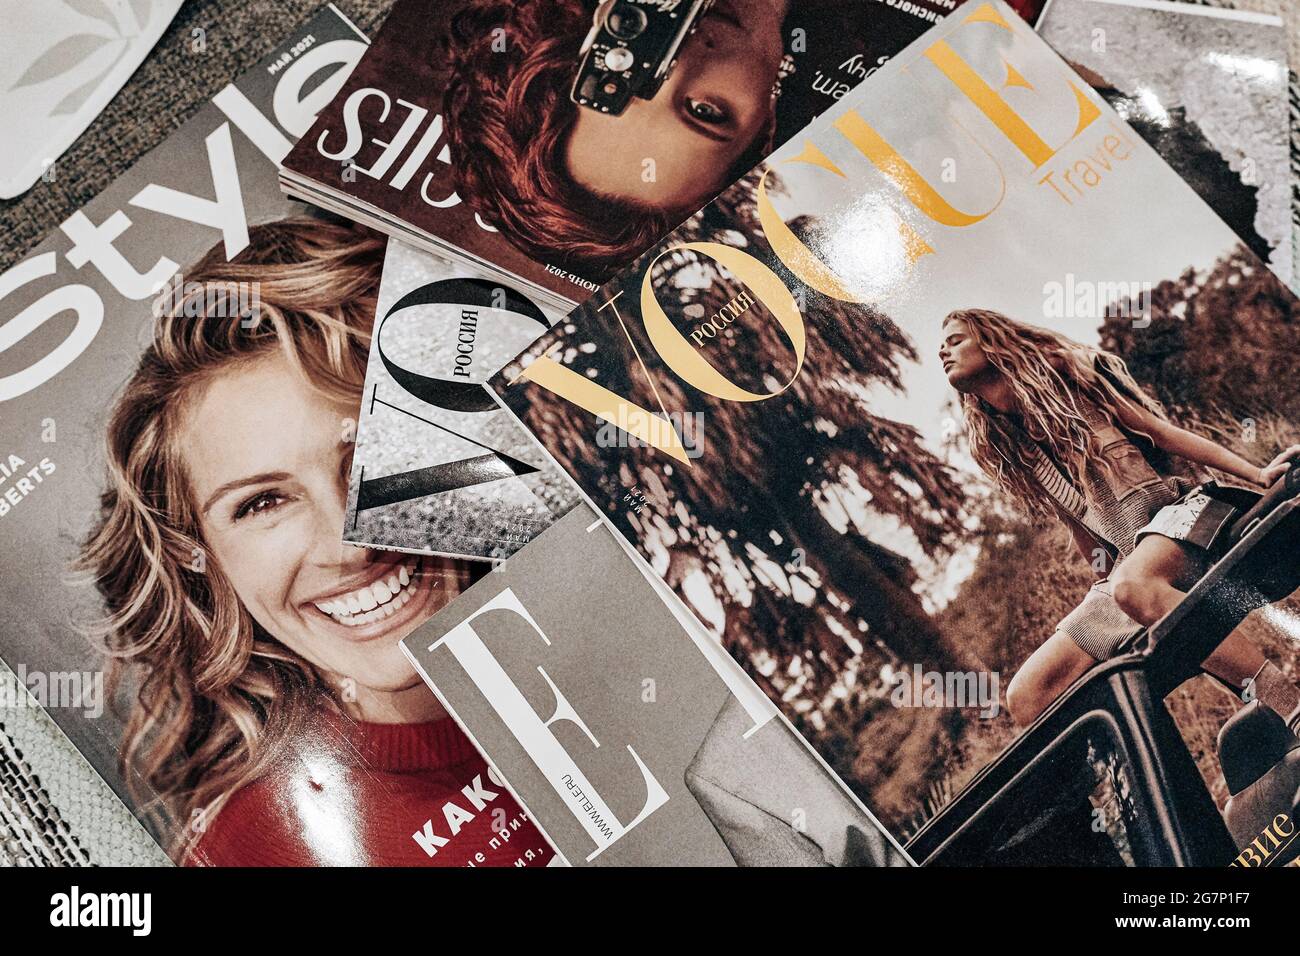 Moscow, Russia - July 15, 2021: Pile of Russian fashion magazines Vogue,  Elle Stock Photo - Alamy